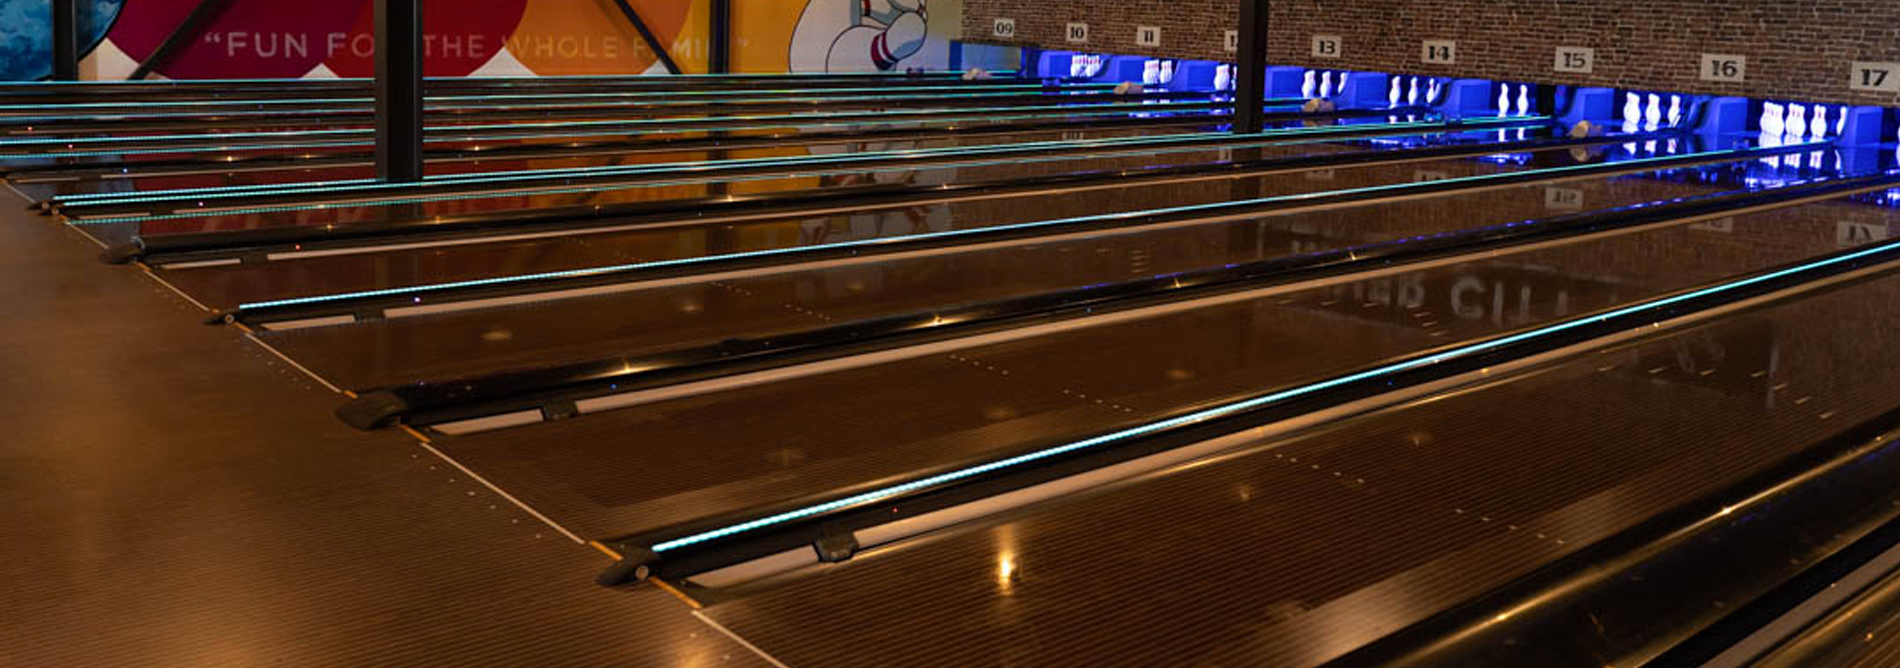 Bowling-QubicaAMF-CAPPING-LIGHTS-A-more-impactful-bowling-experience-banner.jpg